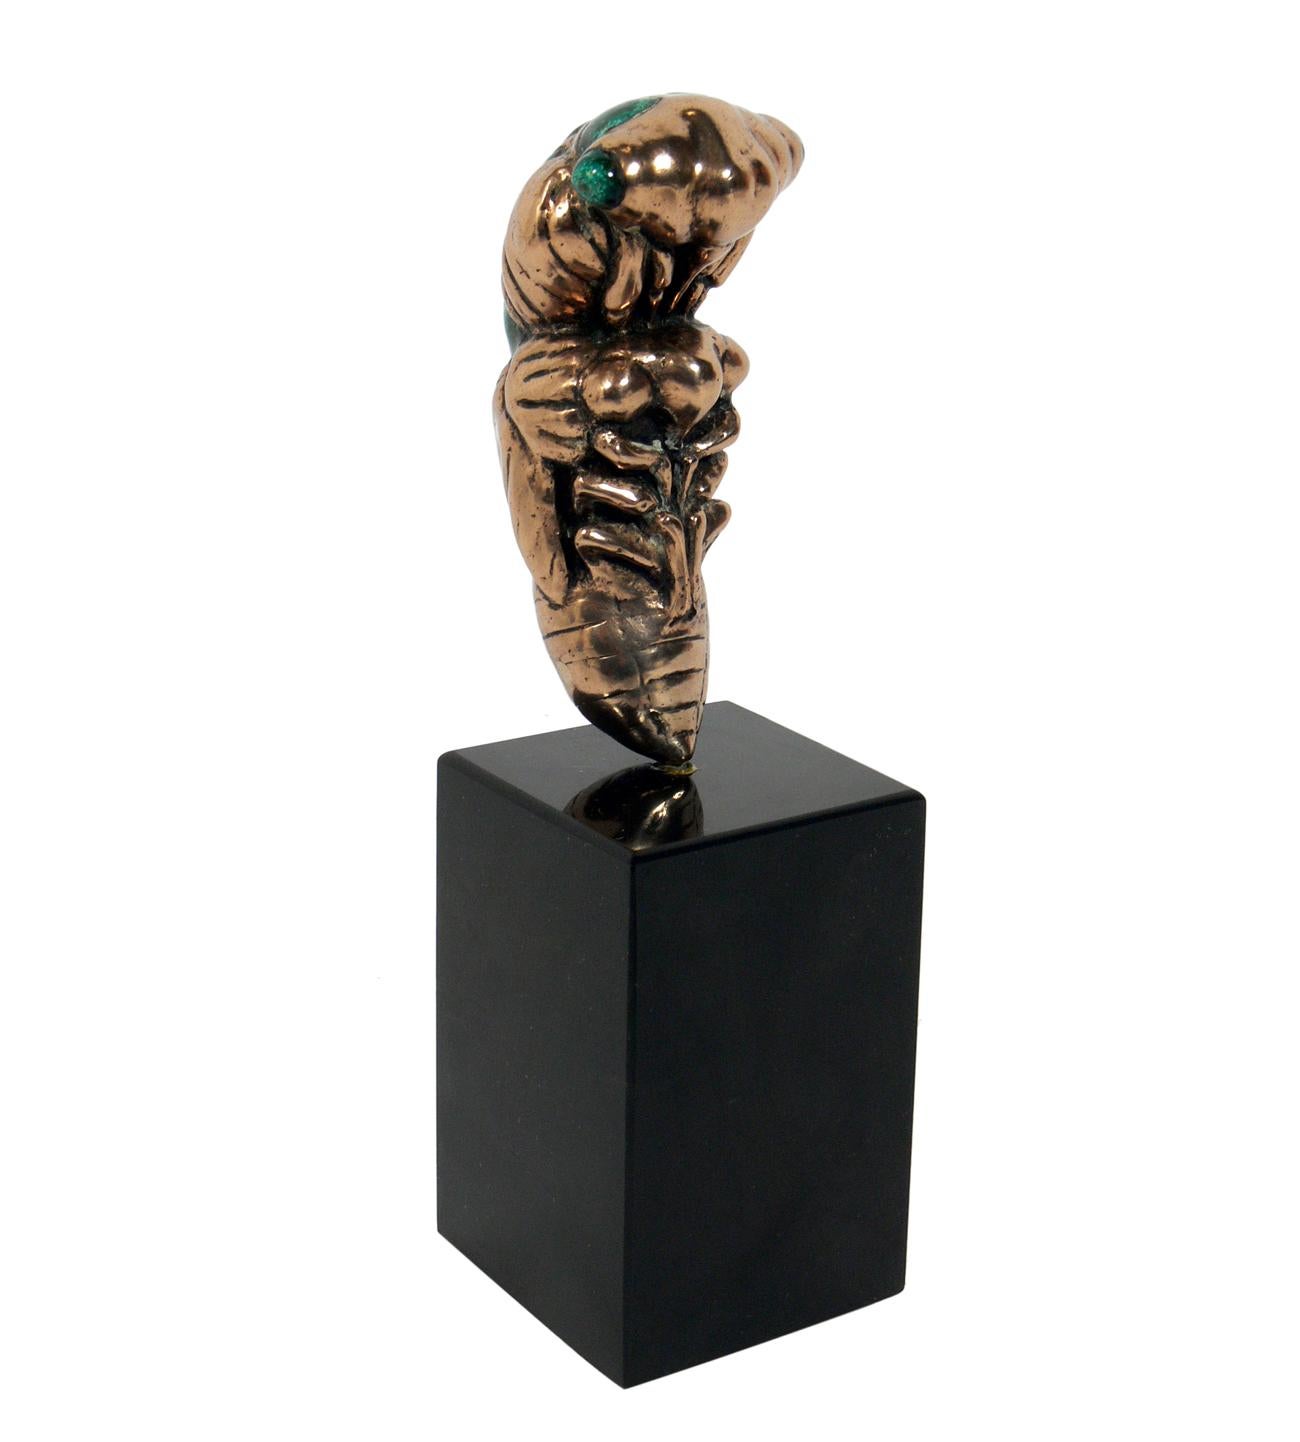 Bronze and enamel Cicada sculpture, by Mary Frances Wawrytko, Cleveland, OH, American, circa 1960s. Constructed of silver plated bronze and enamel on a black granite base. Retains original paperwork given at purchase. See last detail photo.